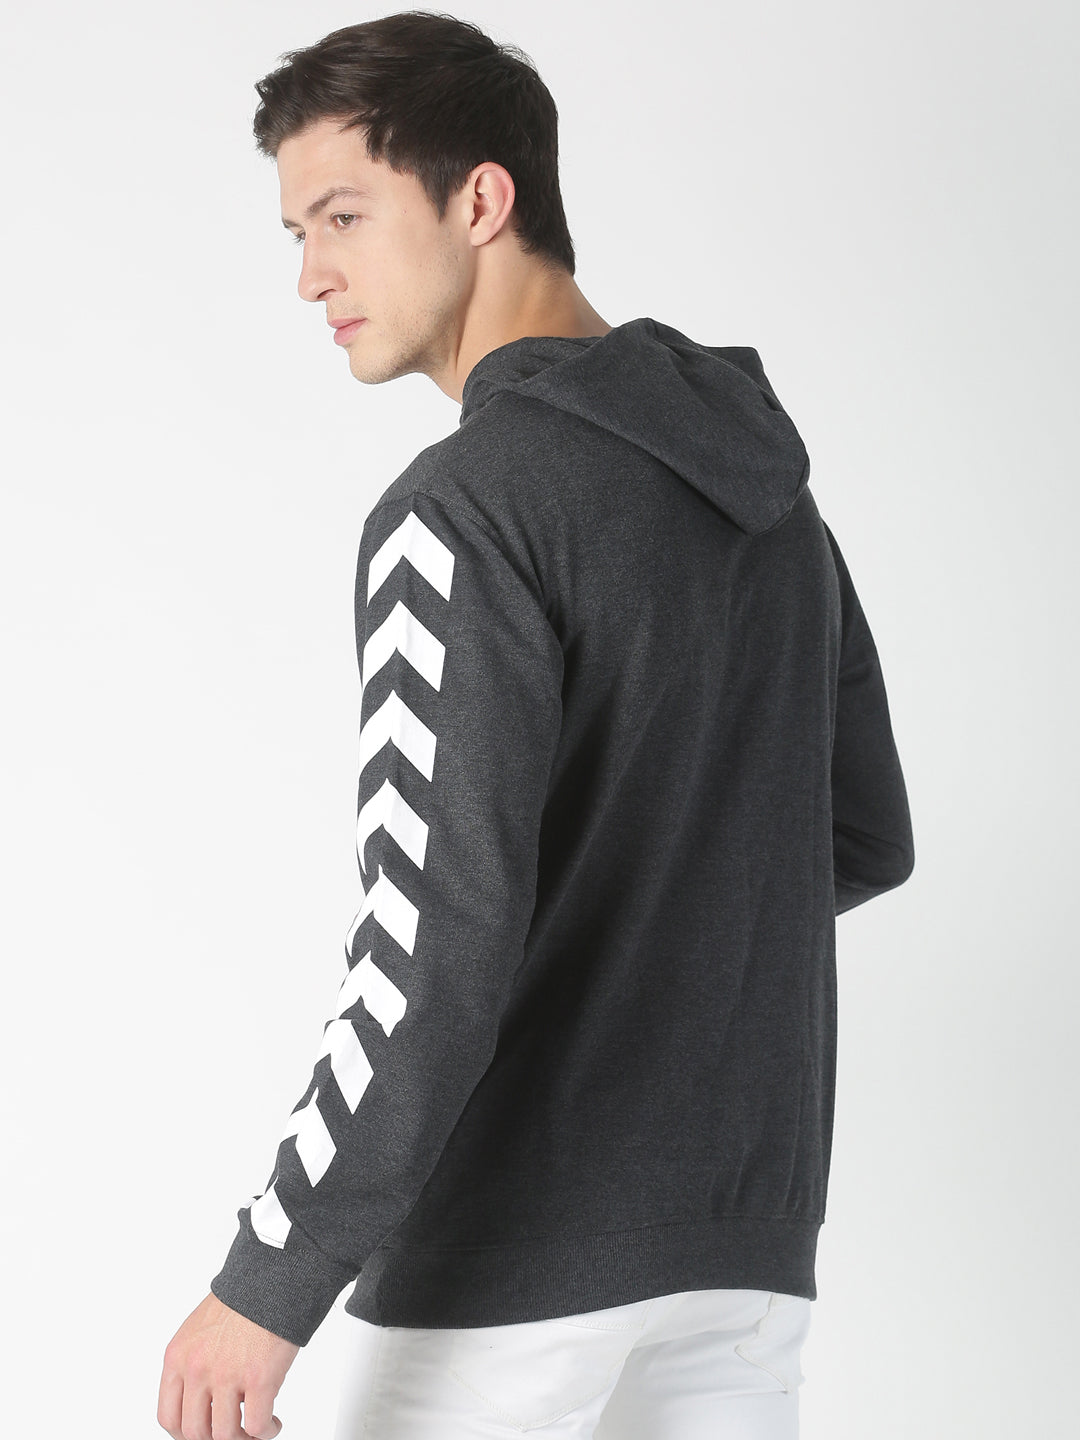 Movement Pullover Hoodie Men's - AestheticNation